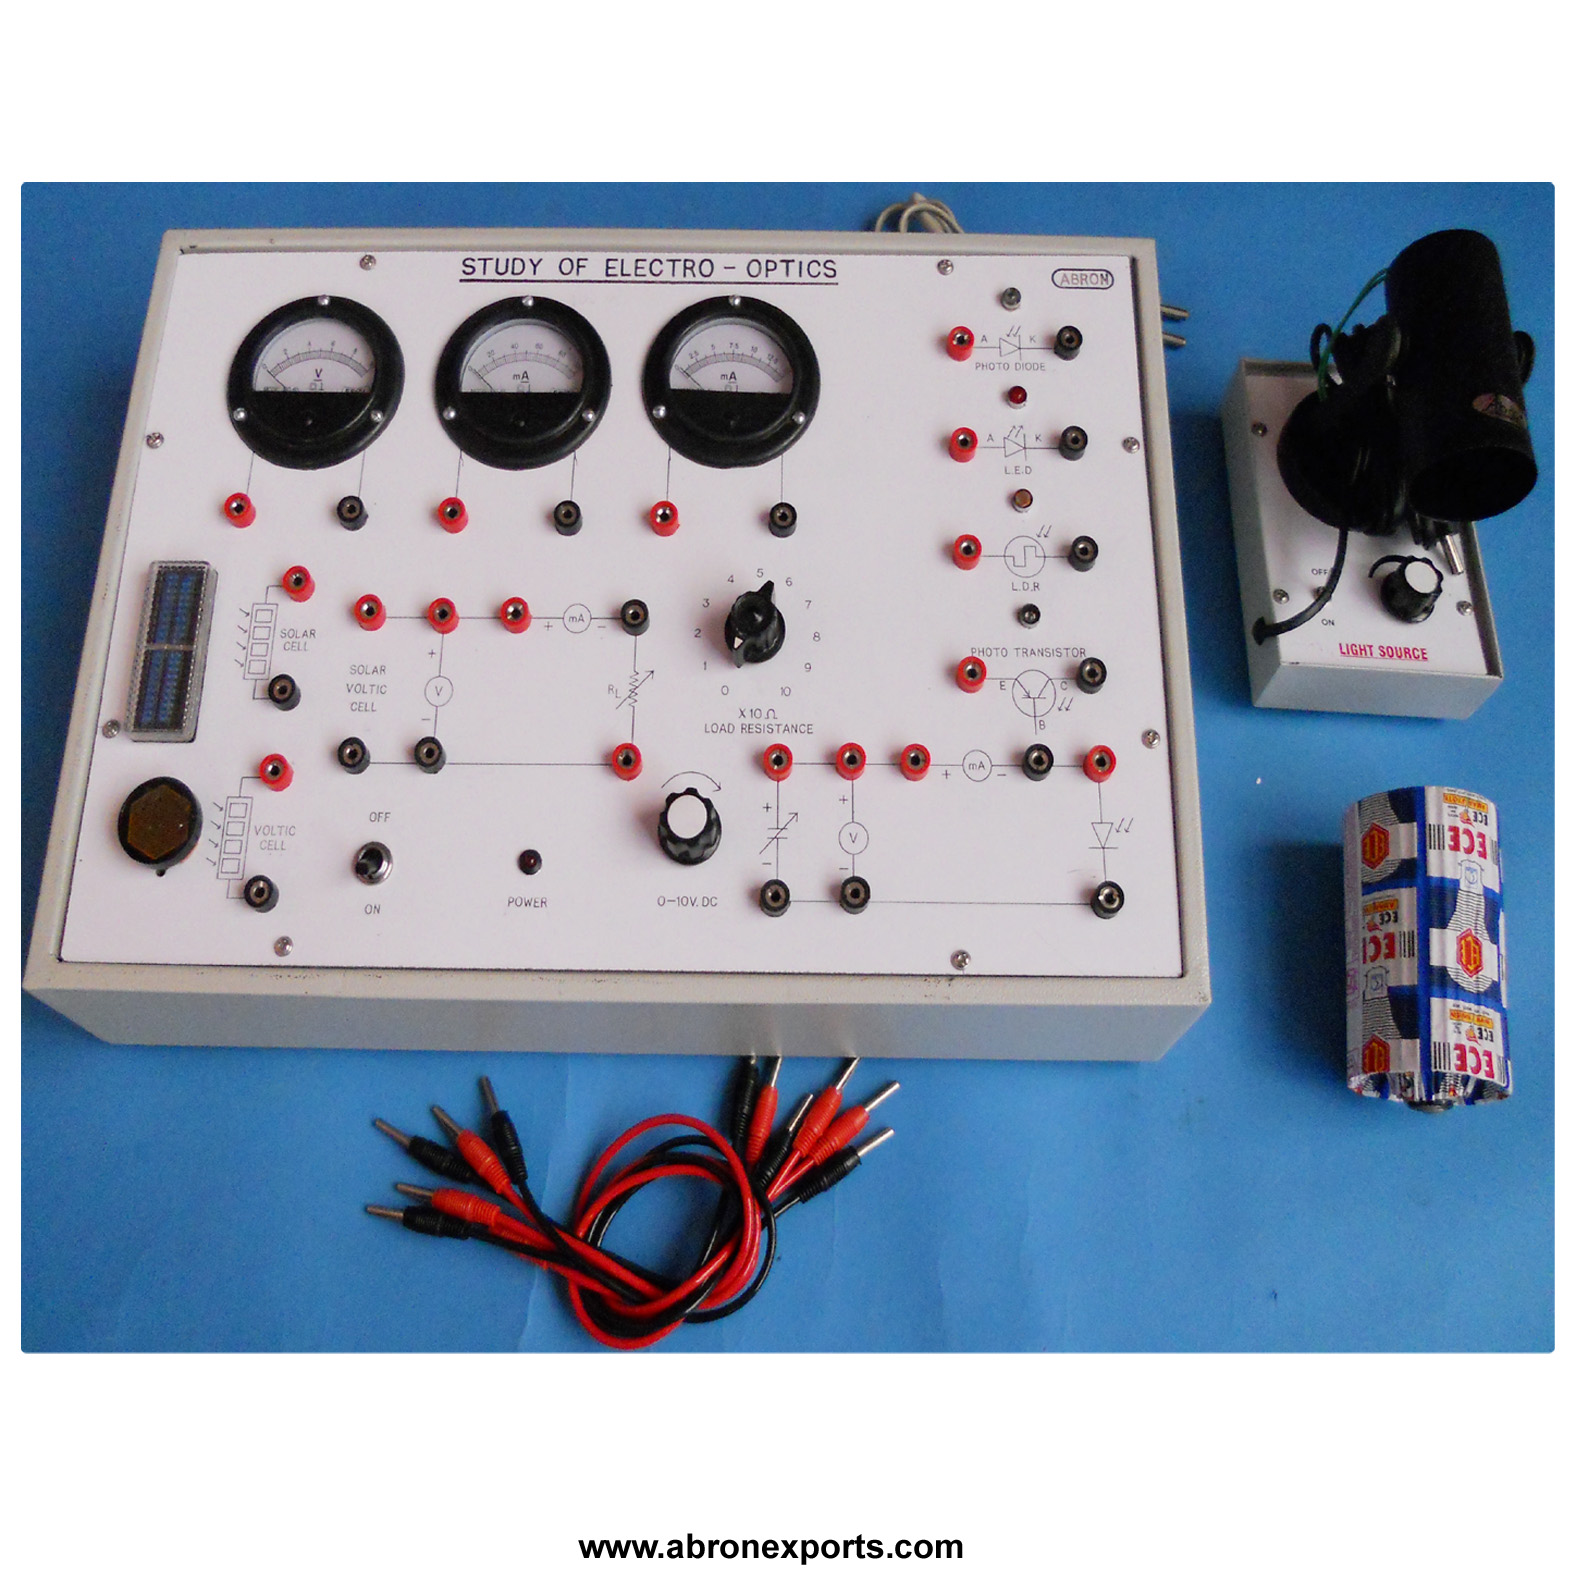 LDR Light Dependent Resistor to study 3 meters with light source ETB Working circuit Trainer with Sockets power supply variable AE-1299B